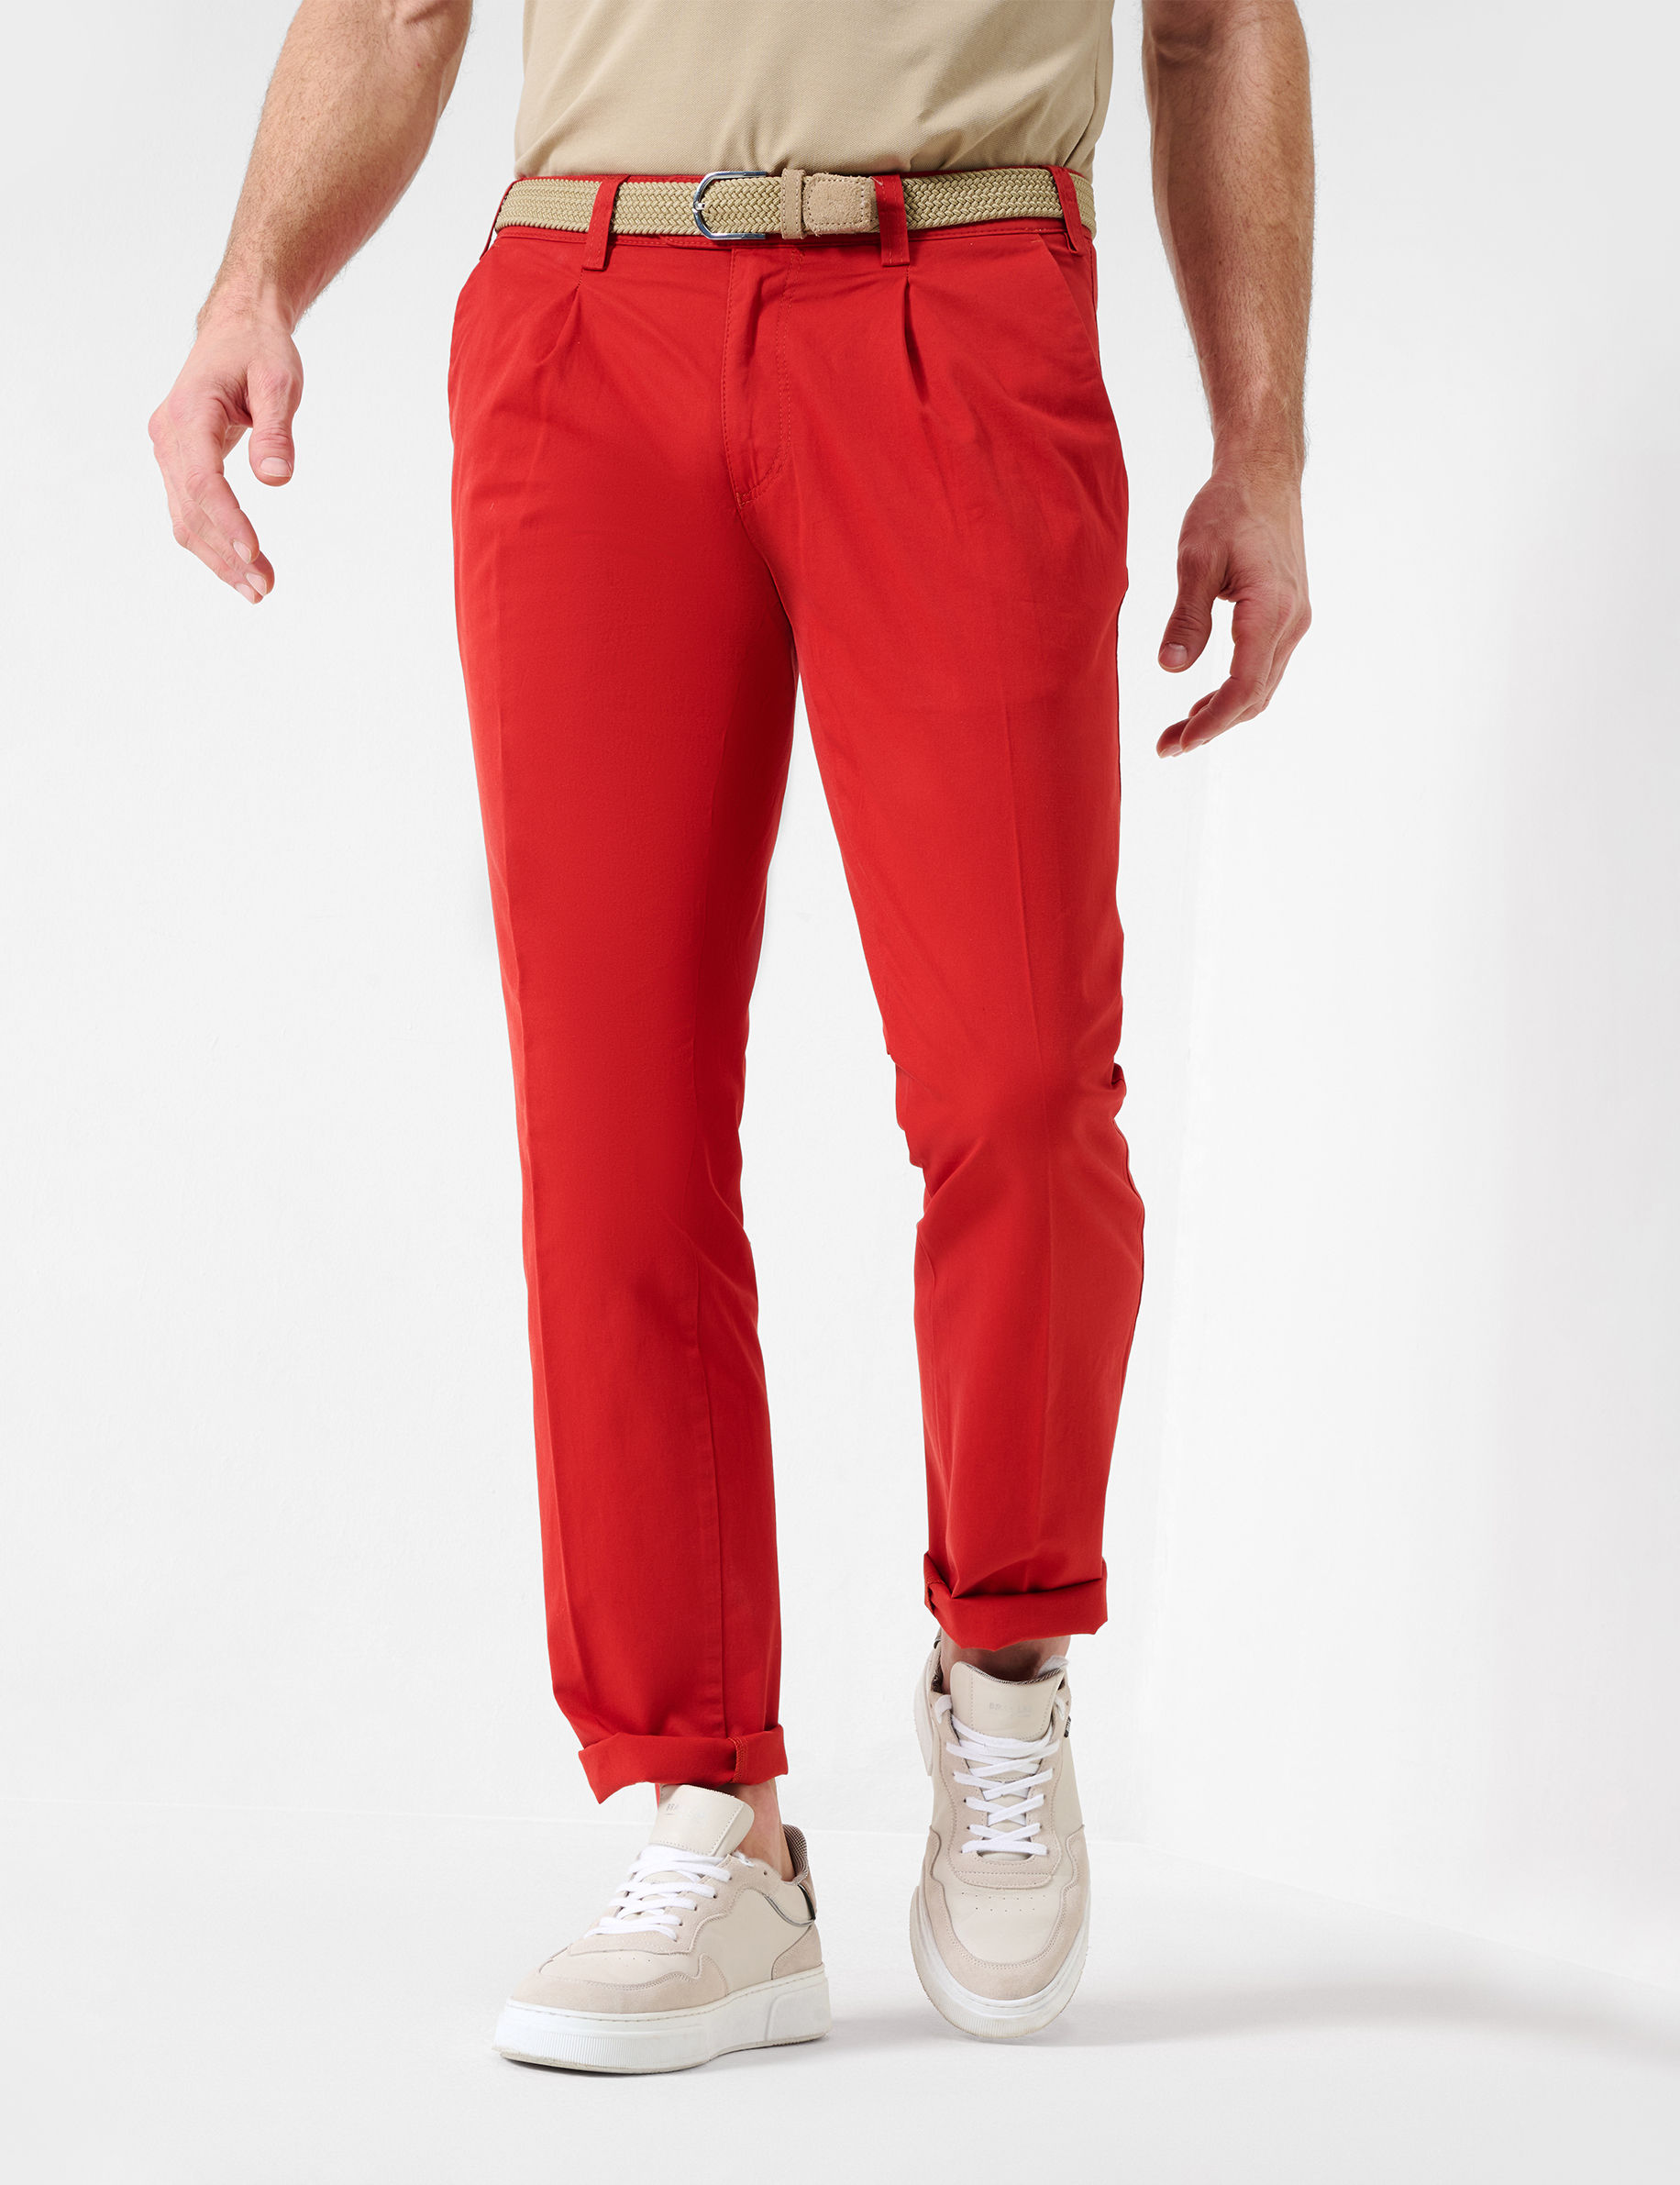 Shades of red, Men, REGULAR, Style LUIS, MODEL_FRONT_ISHOP